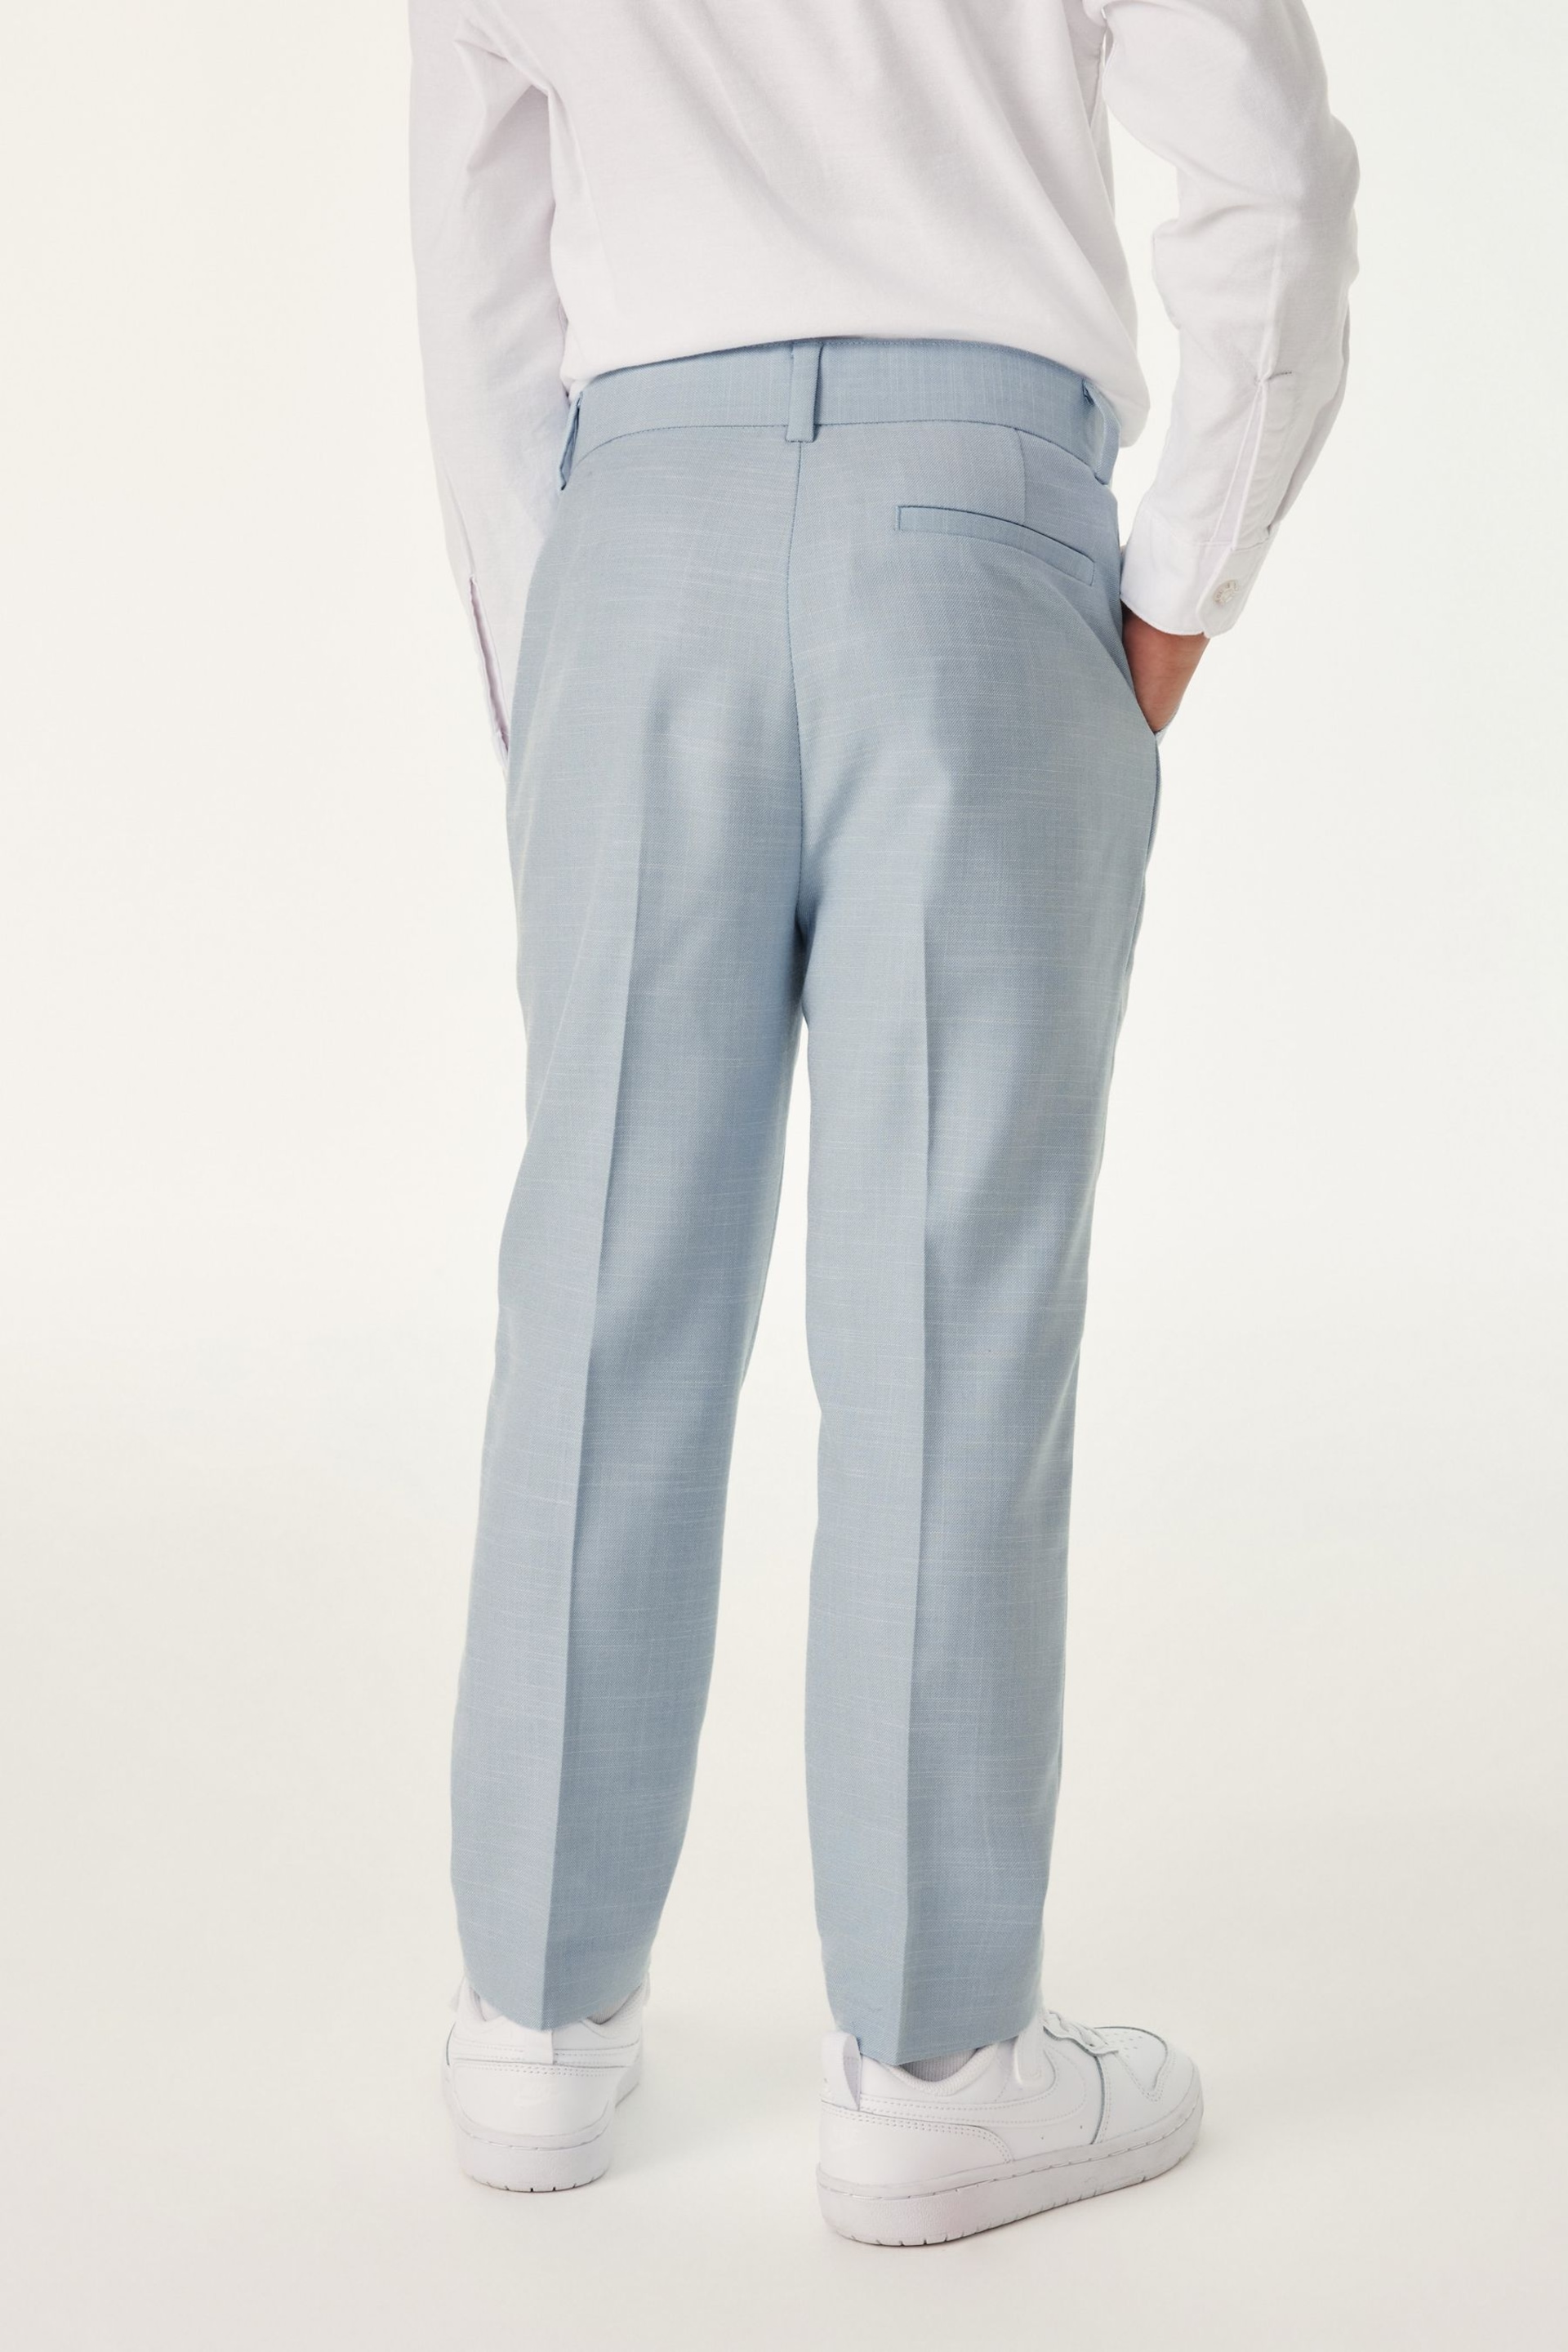 Baker by Ted Baker Suit Trousers - Image 4 of 10